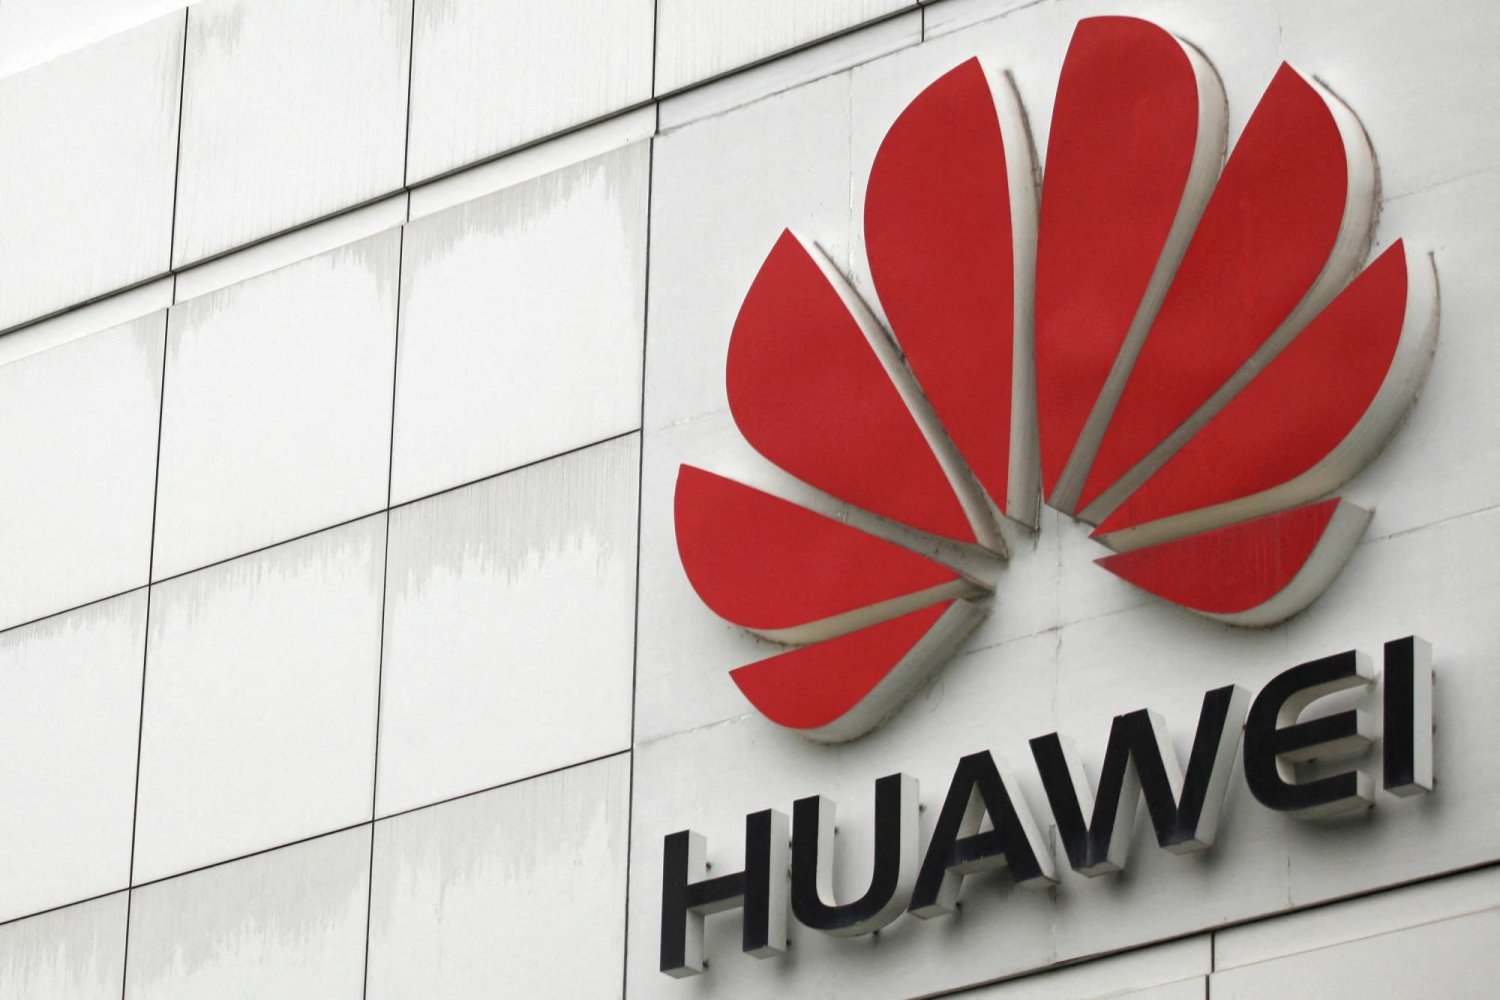 FILE PHOTO: The logo of the Huawei Technologies Co. Ltd. is seen outside its headquarters in Shenzhen, Guangdong province, April 17, 2012. REUTERS/Tyrone Siu/File Photo